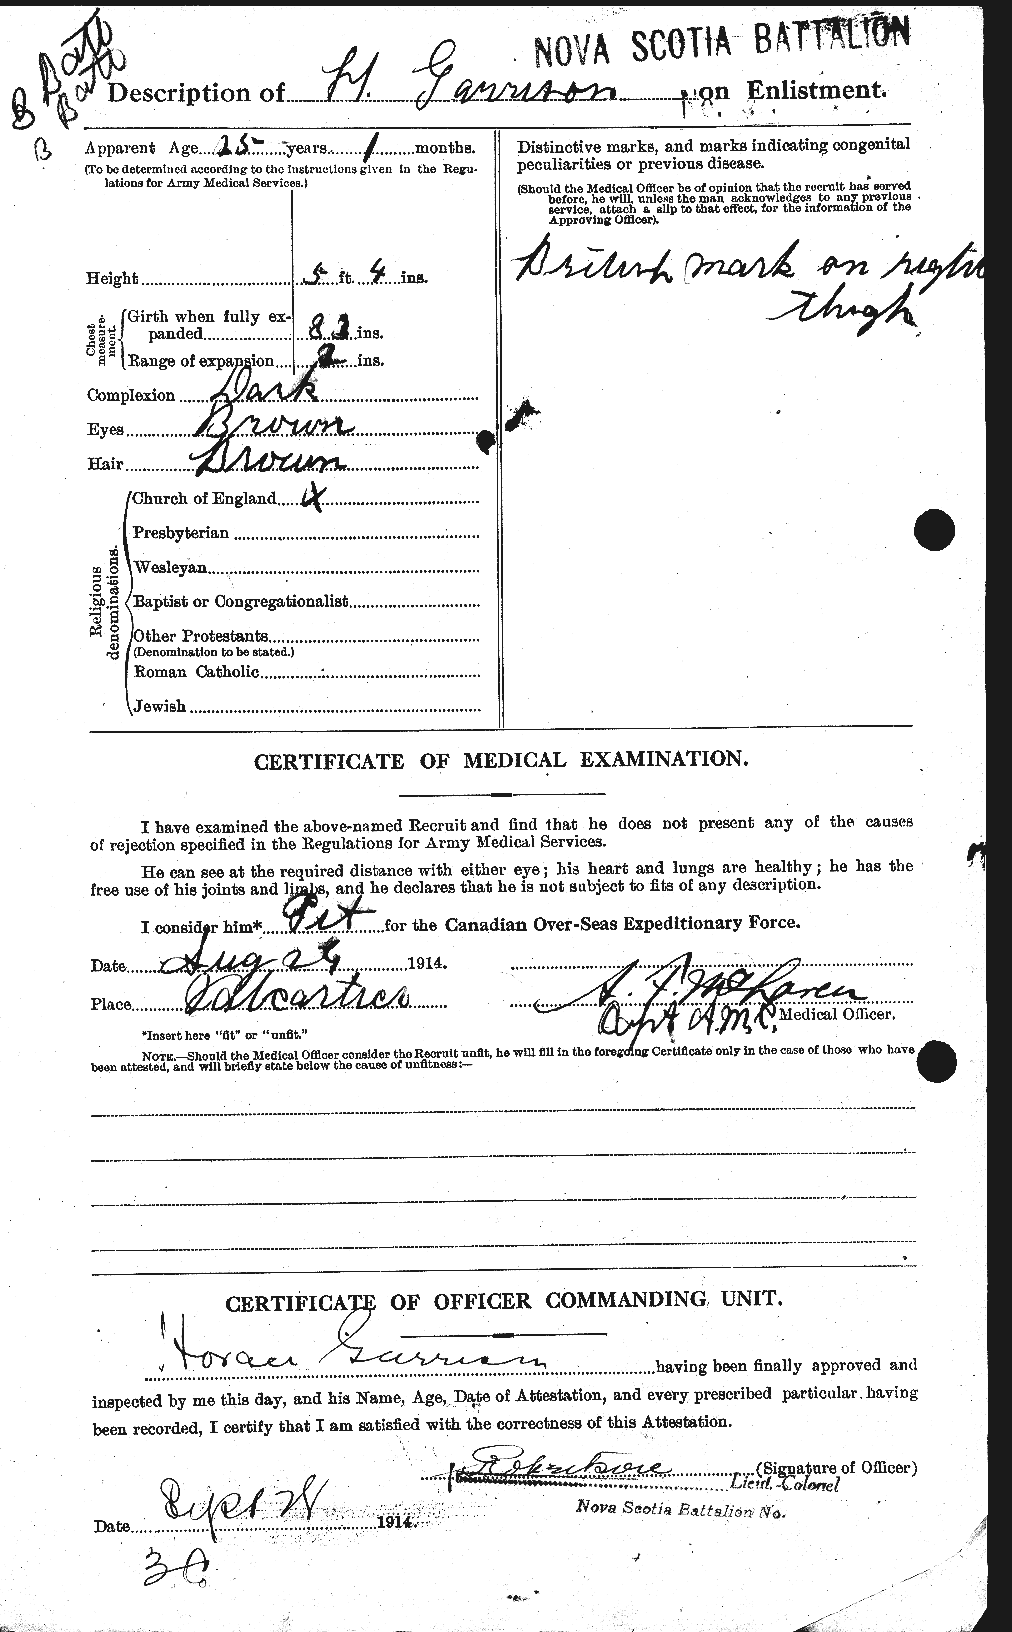 Personnel Records of the First World War - CEF 343394b